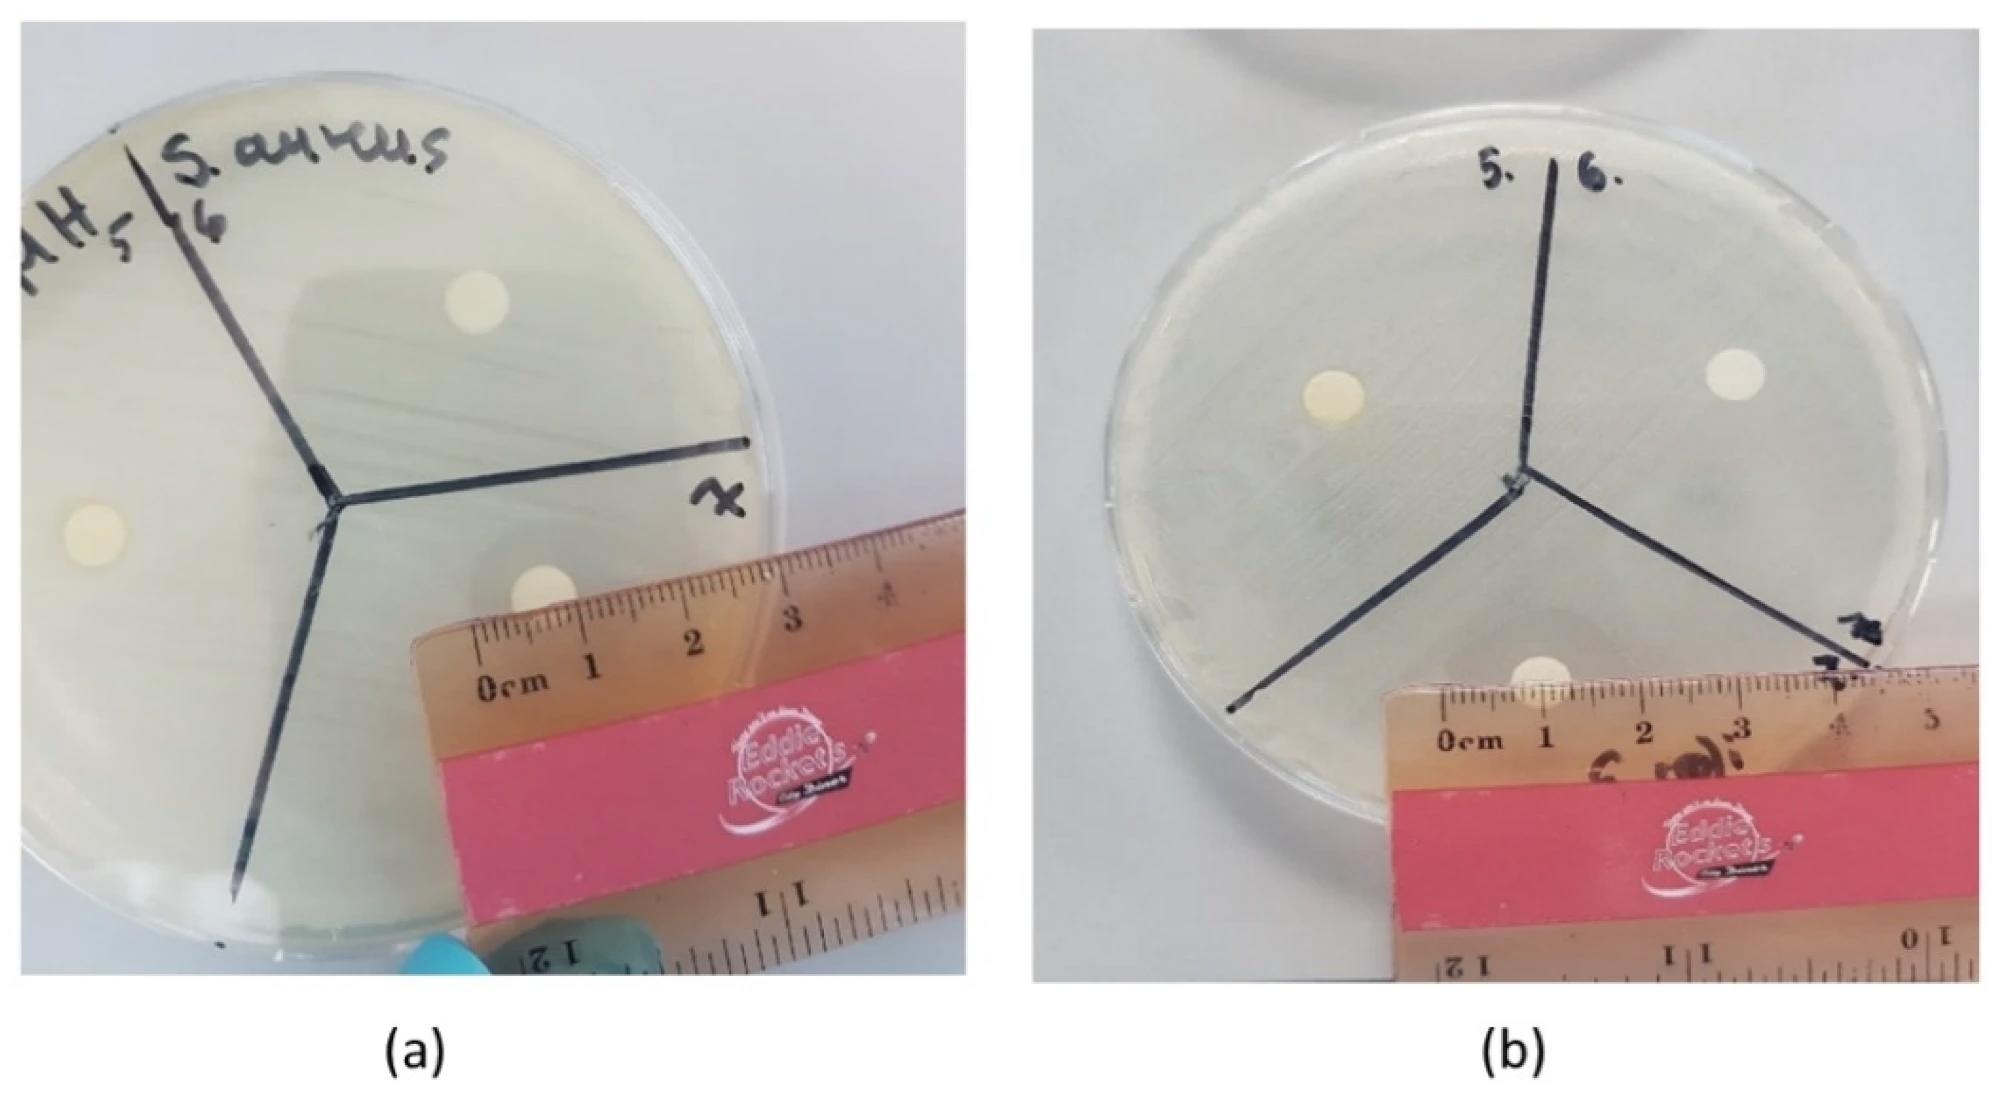 The measurement of the inhibition zone of tea tree oil on different bacteria: (a) S. aureus and (b) E. coli.